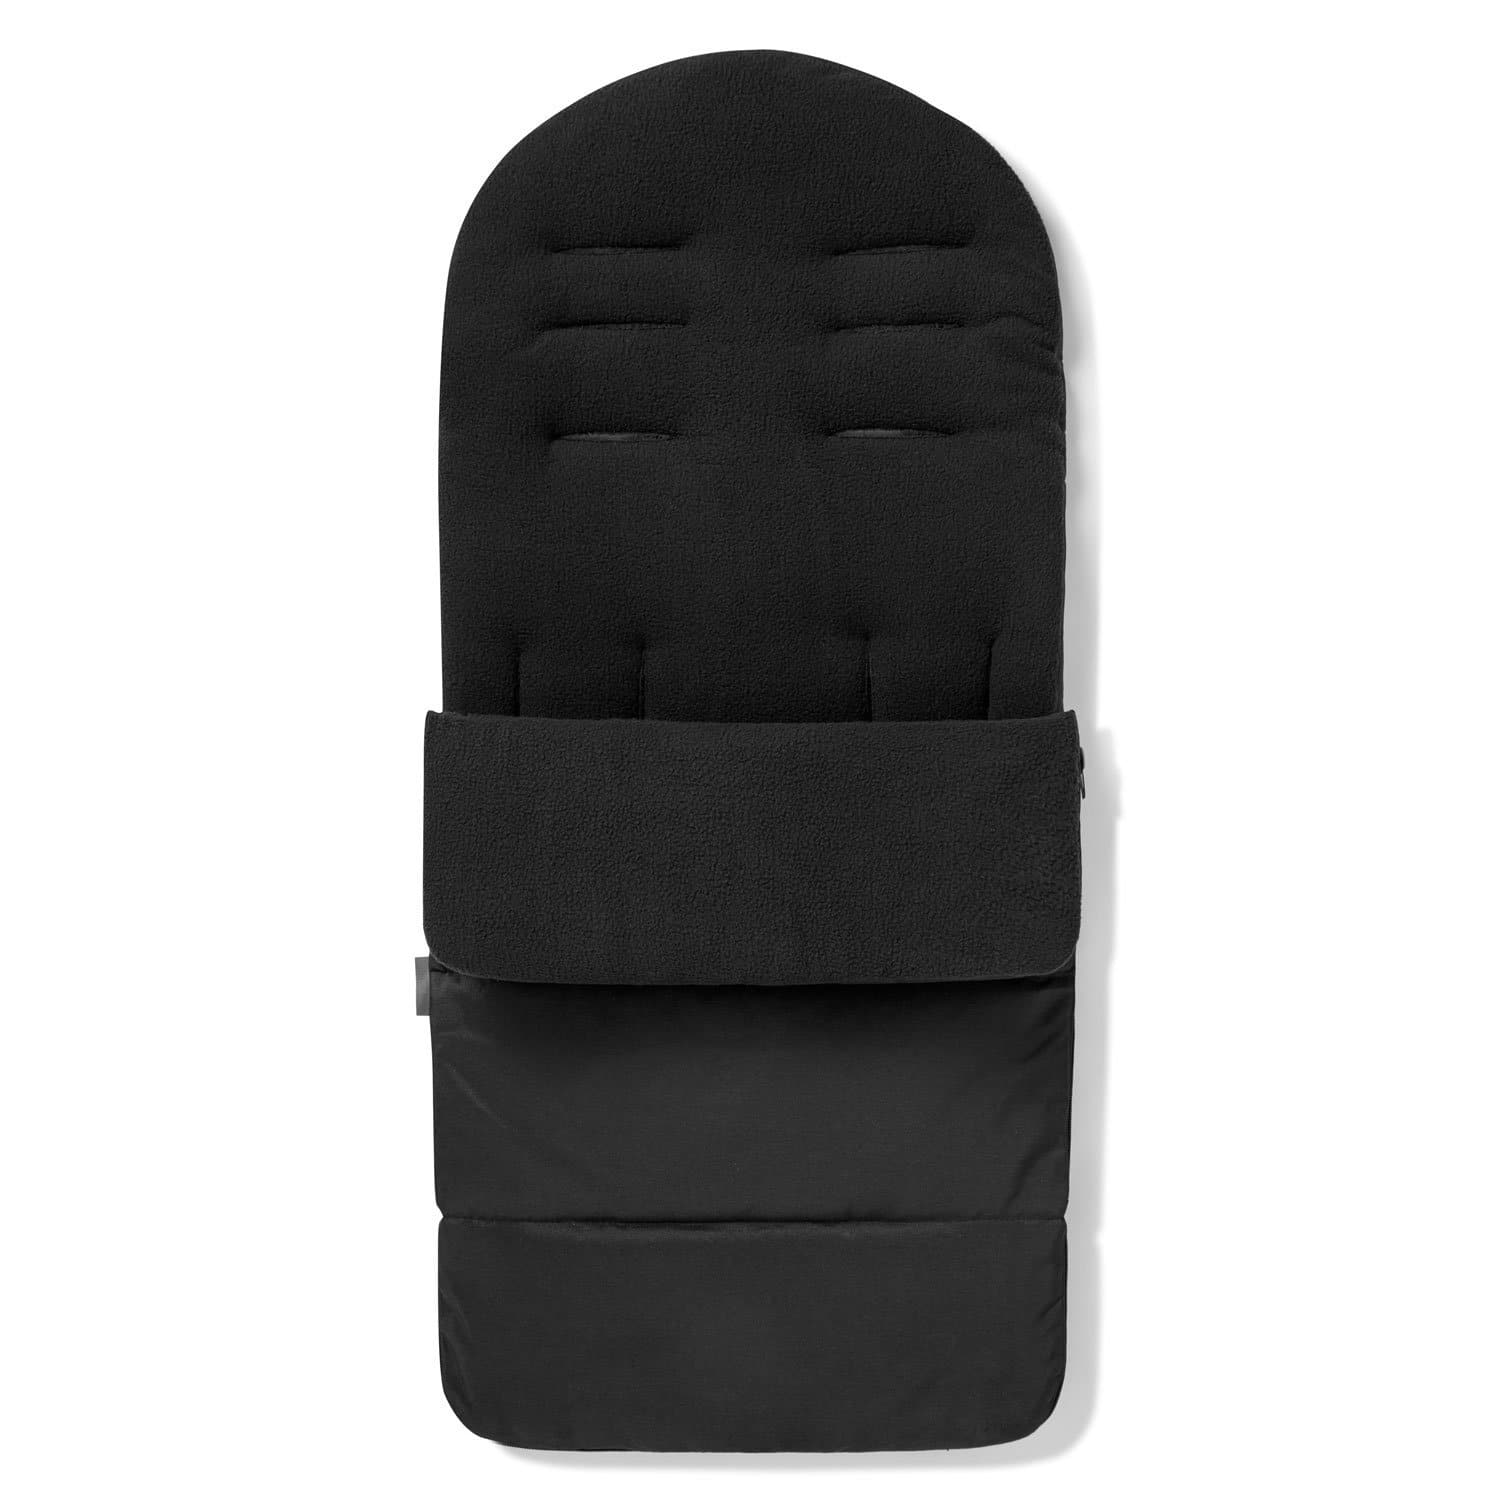 Premium Footmuff / Cosy Toes Compatible with Kiddy - Black Jack / Fits All Models | For Your Little One